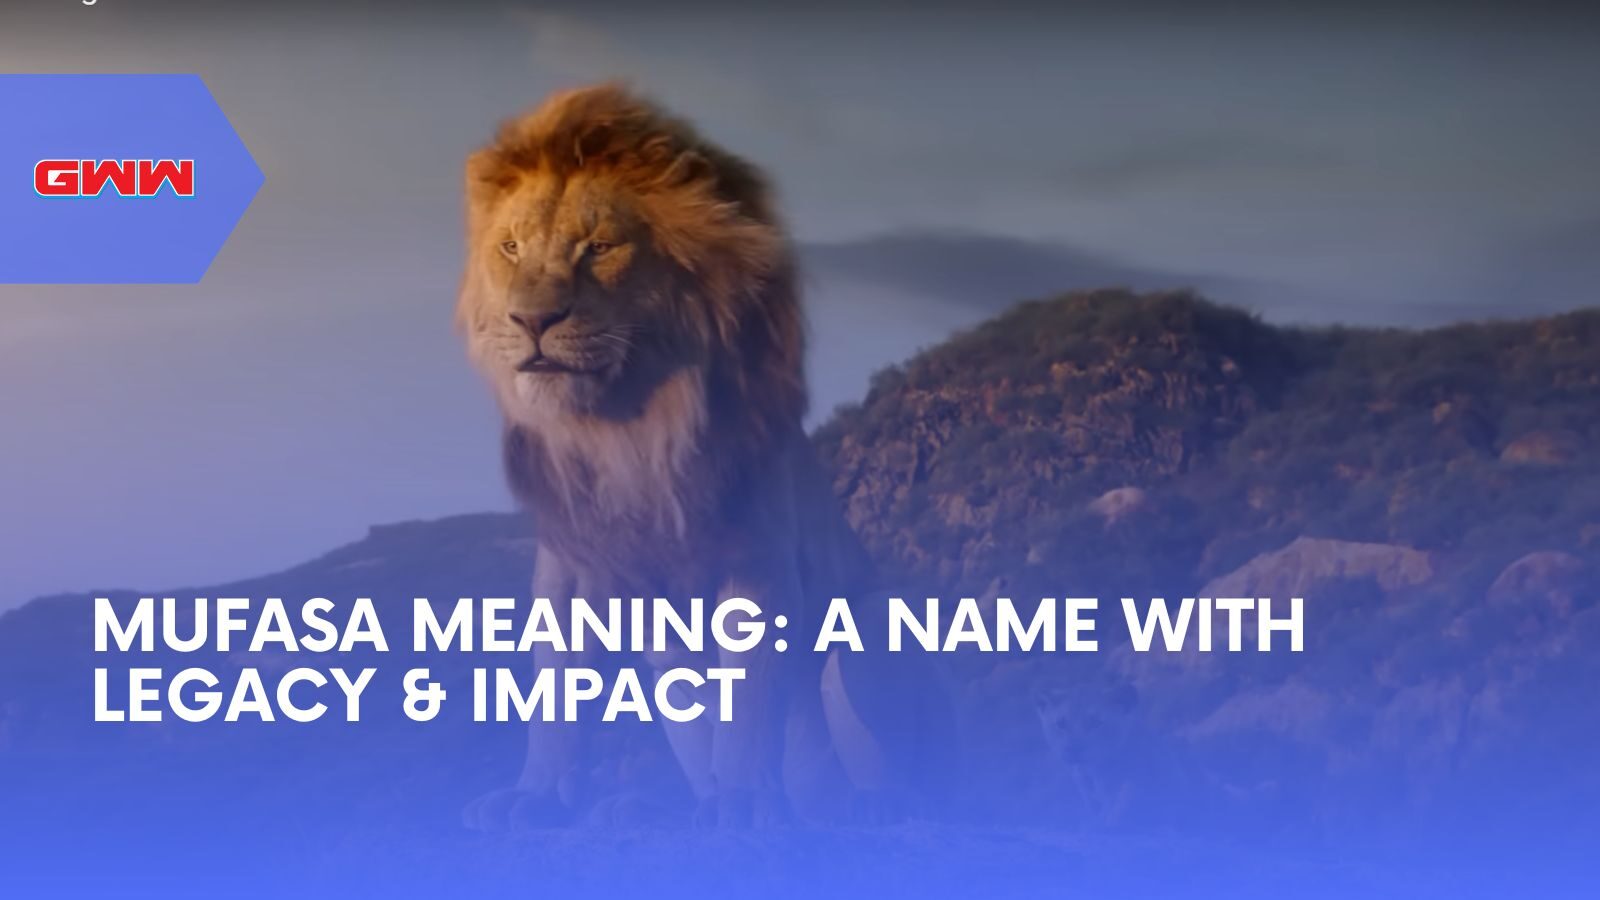 Mufasa Meaning: A Name with Legacy & Impact